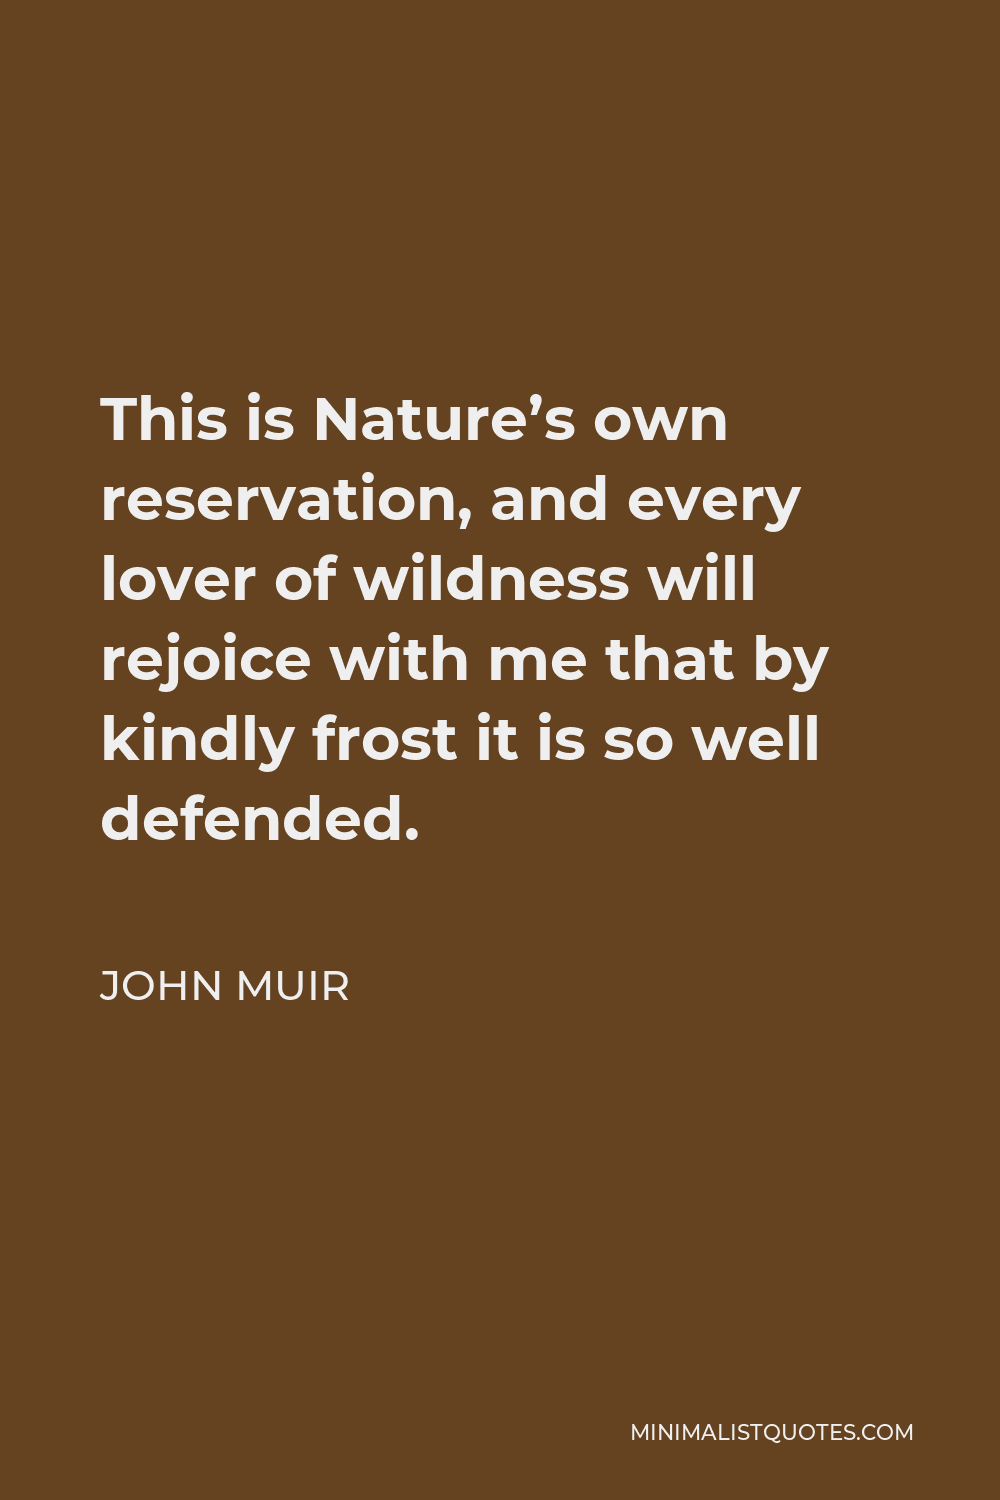 John Muir Quote - This is Nature’s own reservation, and every lover of wildness will rejoice with me that by kindly frost it is so well defended.